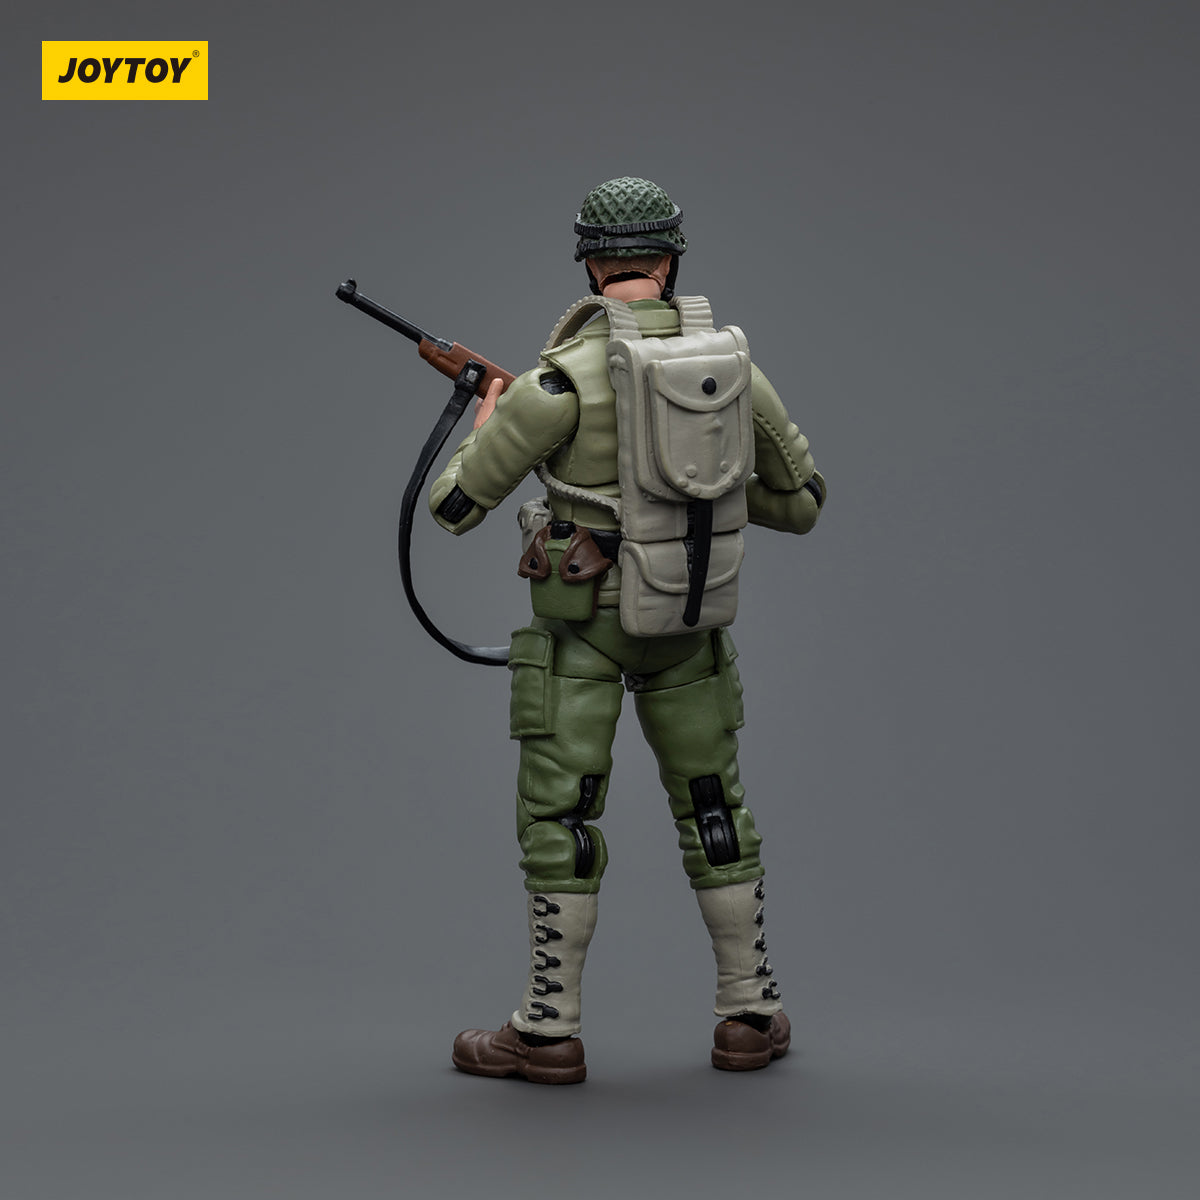 WWII アメリカ陸軍 WWII United States Army 1/18スケール 塗装済み可動フィギュア